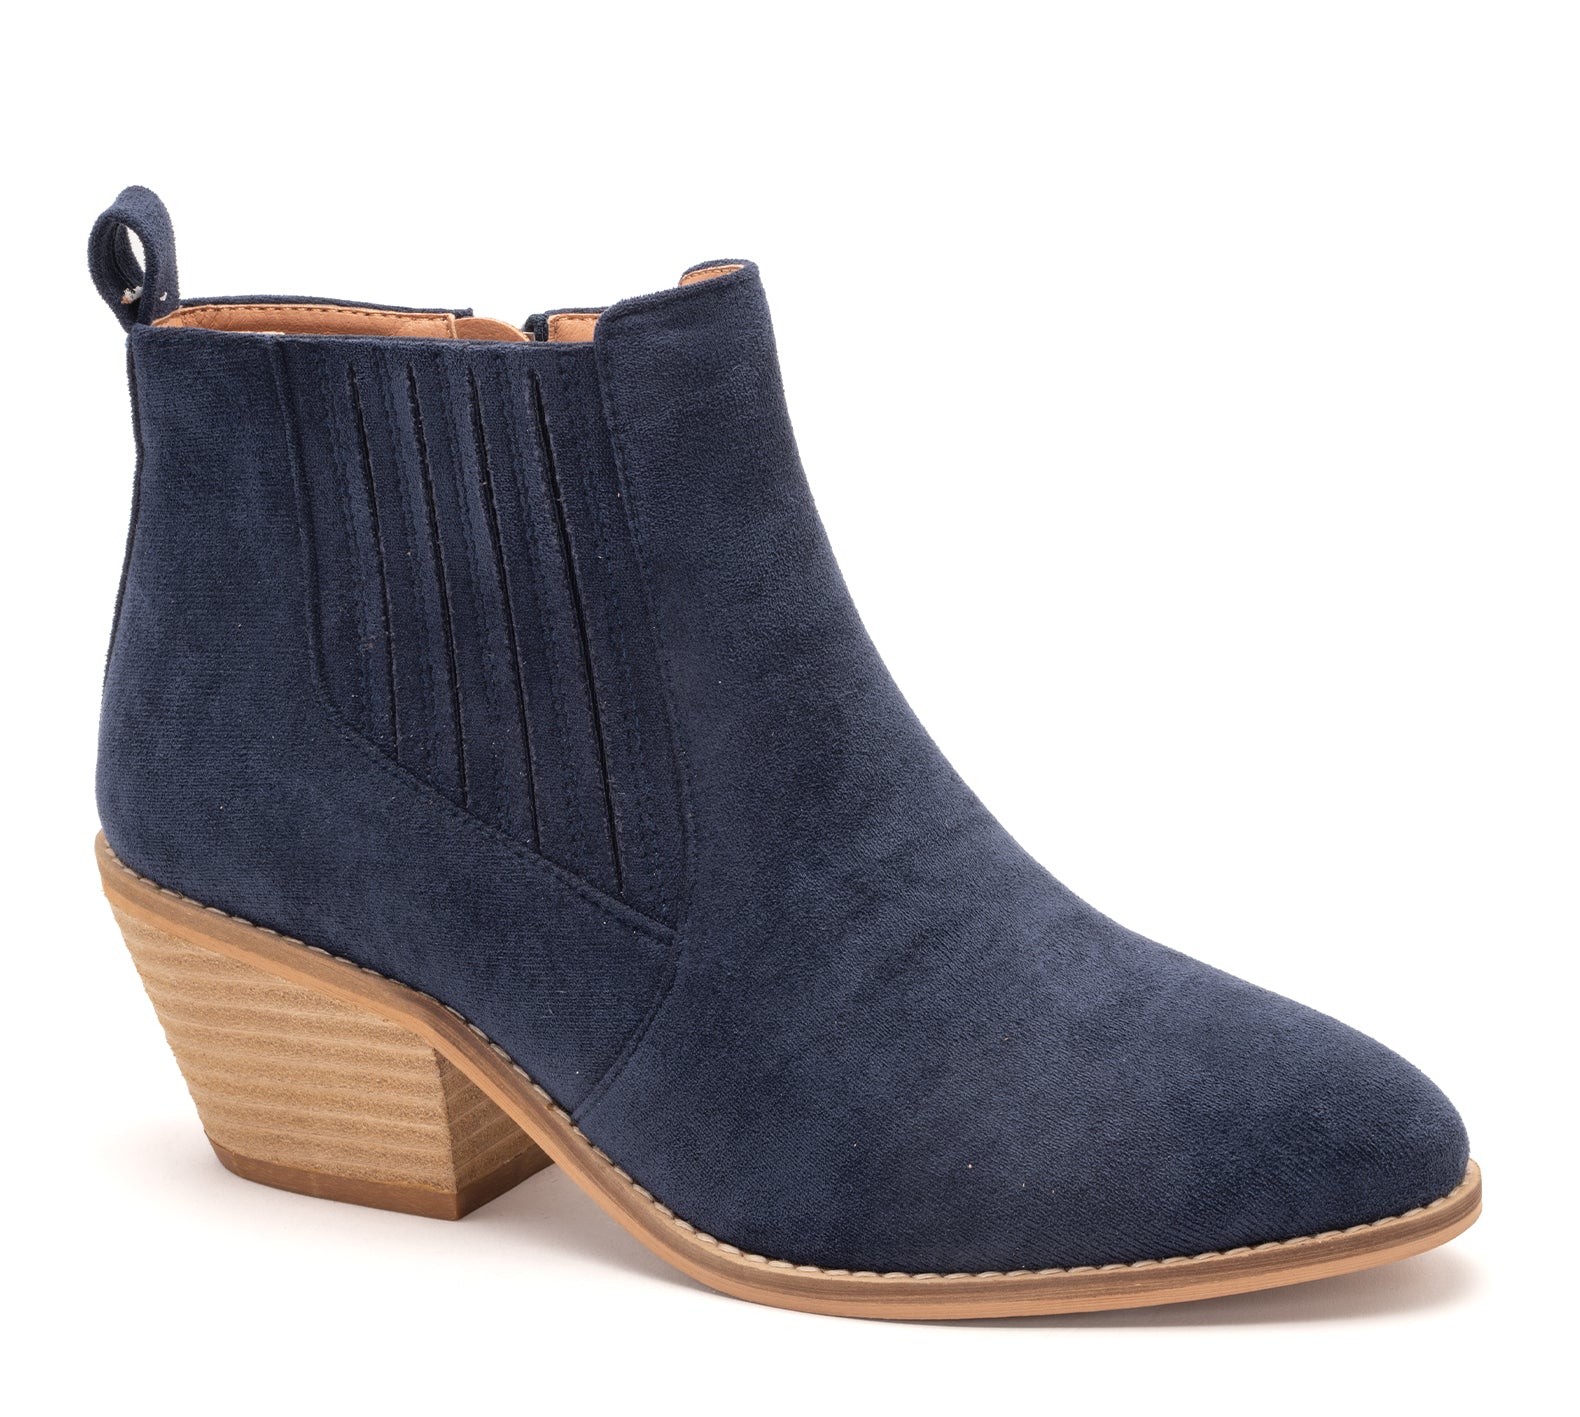 Corky navy suede boots